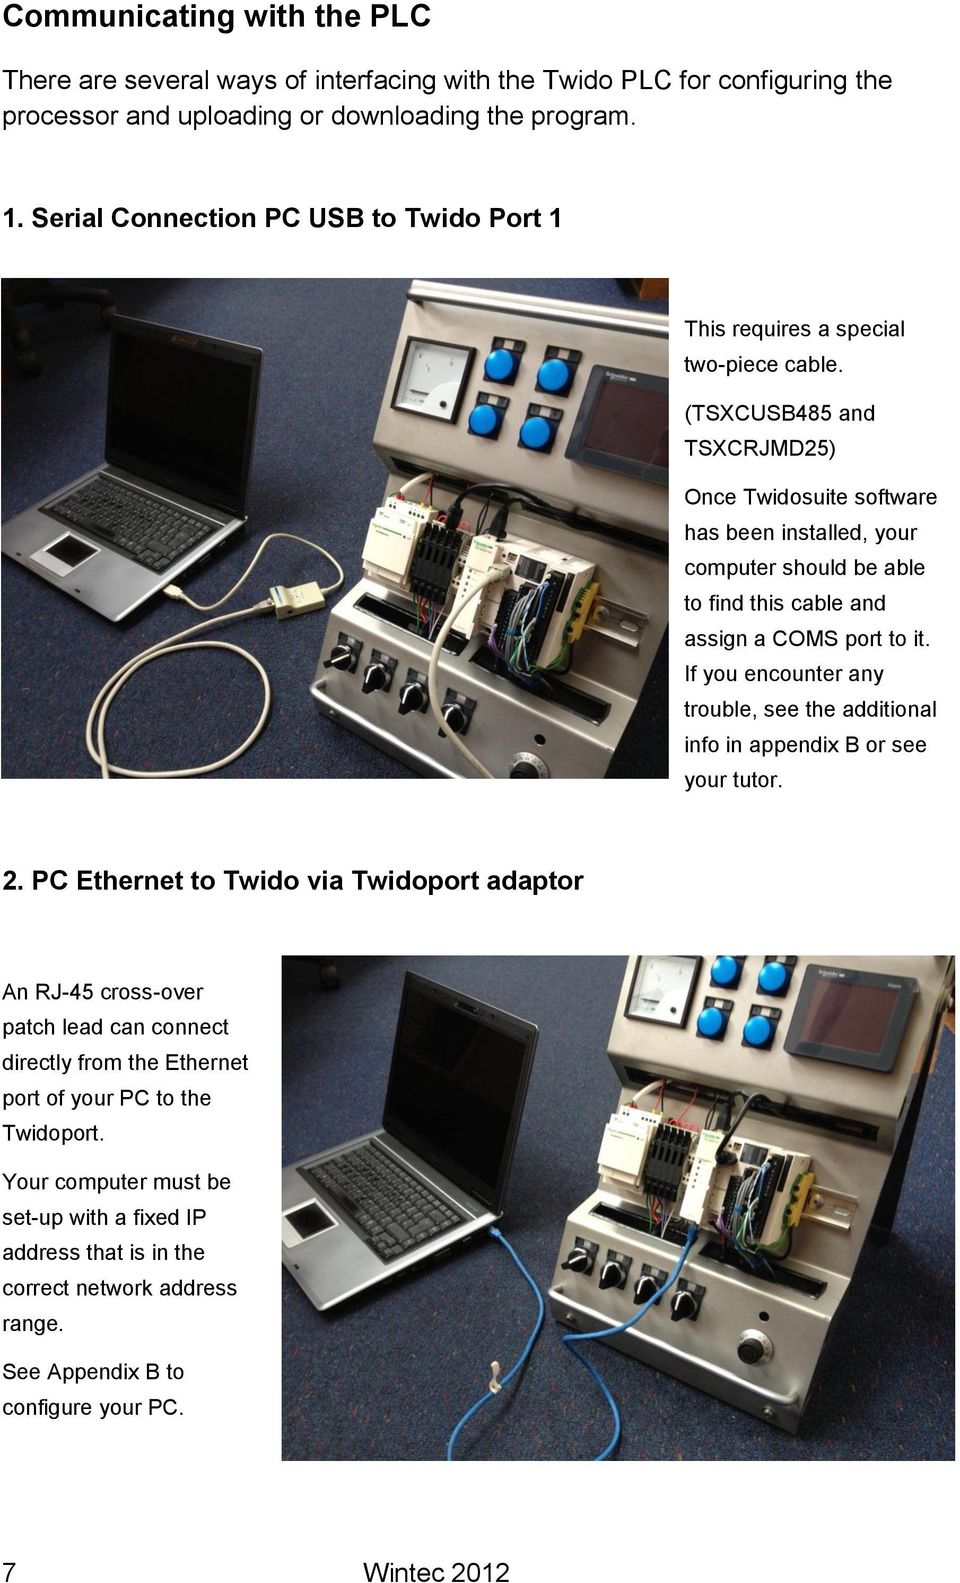 (TSXCUSB485 and TSXCRJMD25) Once Twidosuite software has been installed, your computer should be able to find this cable and assign a COMS port to it.